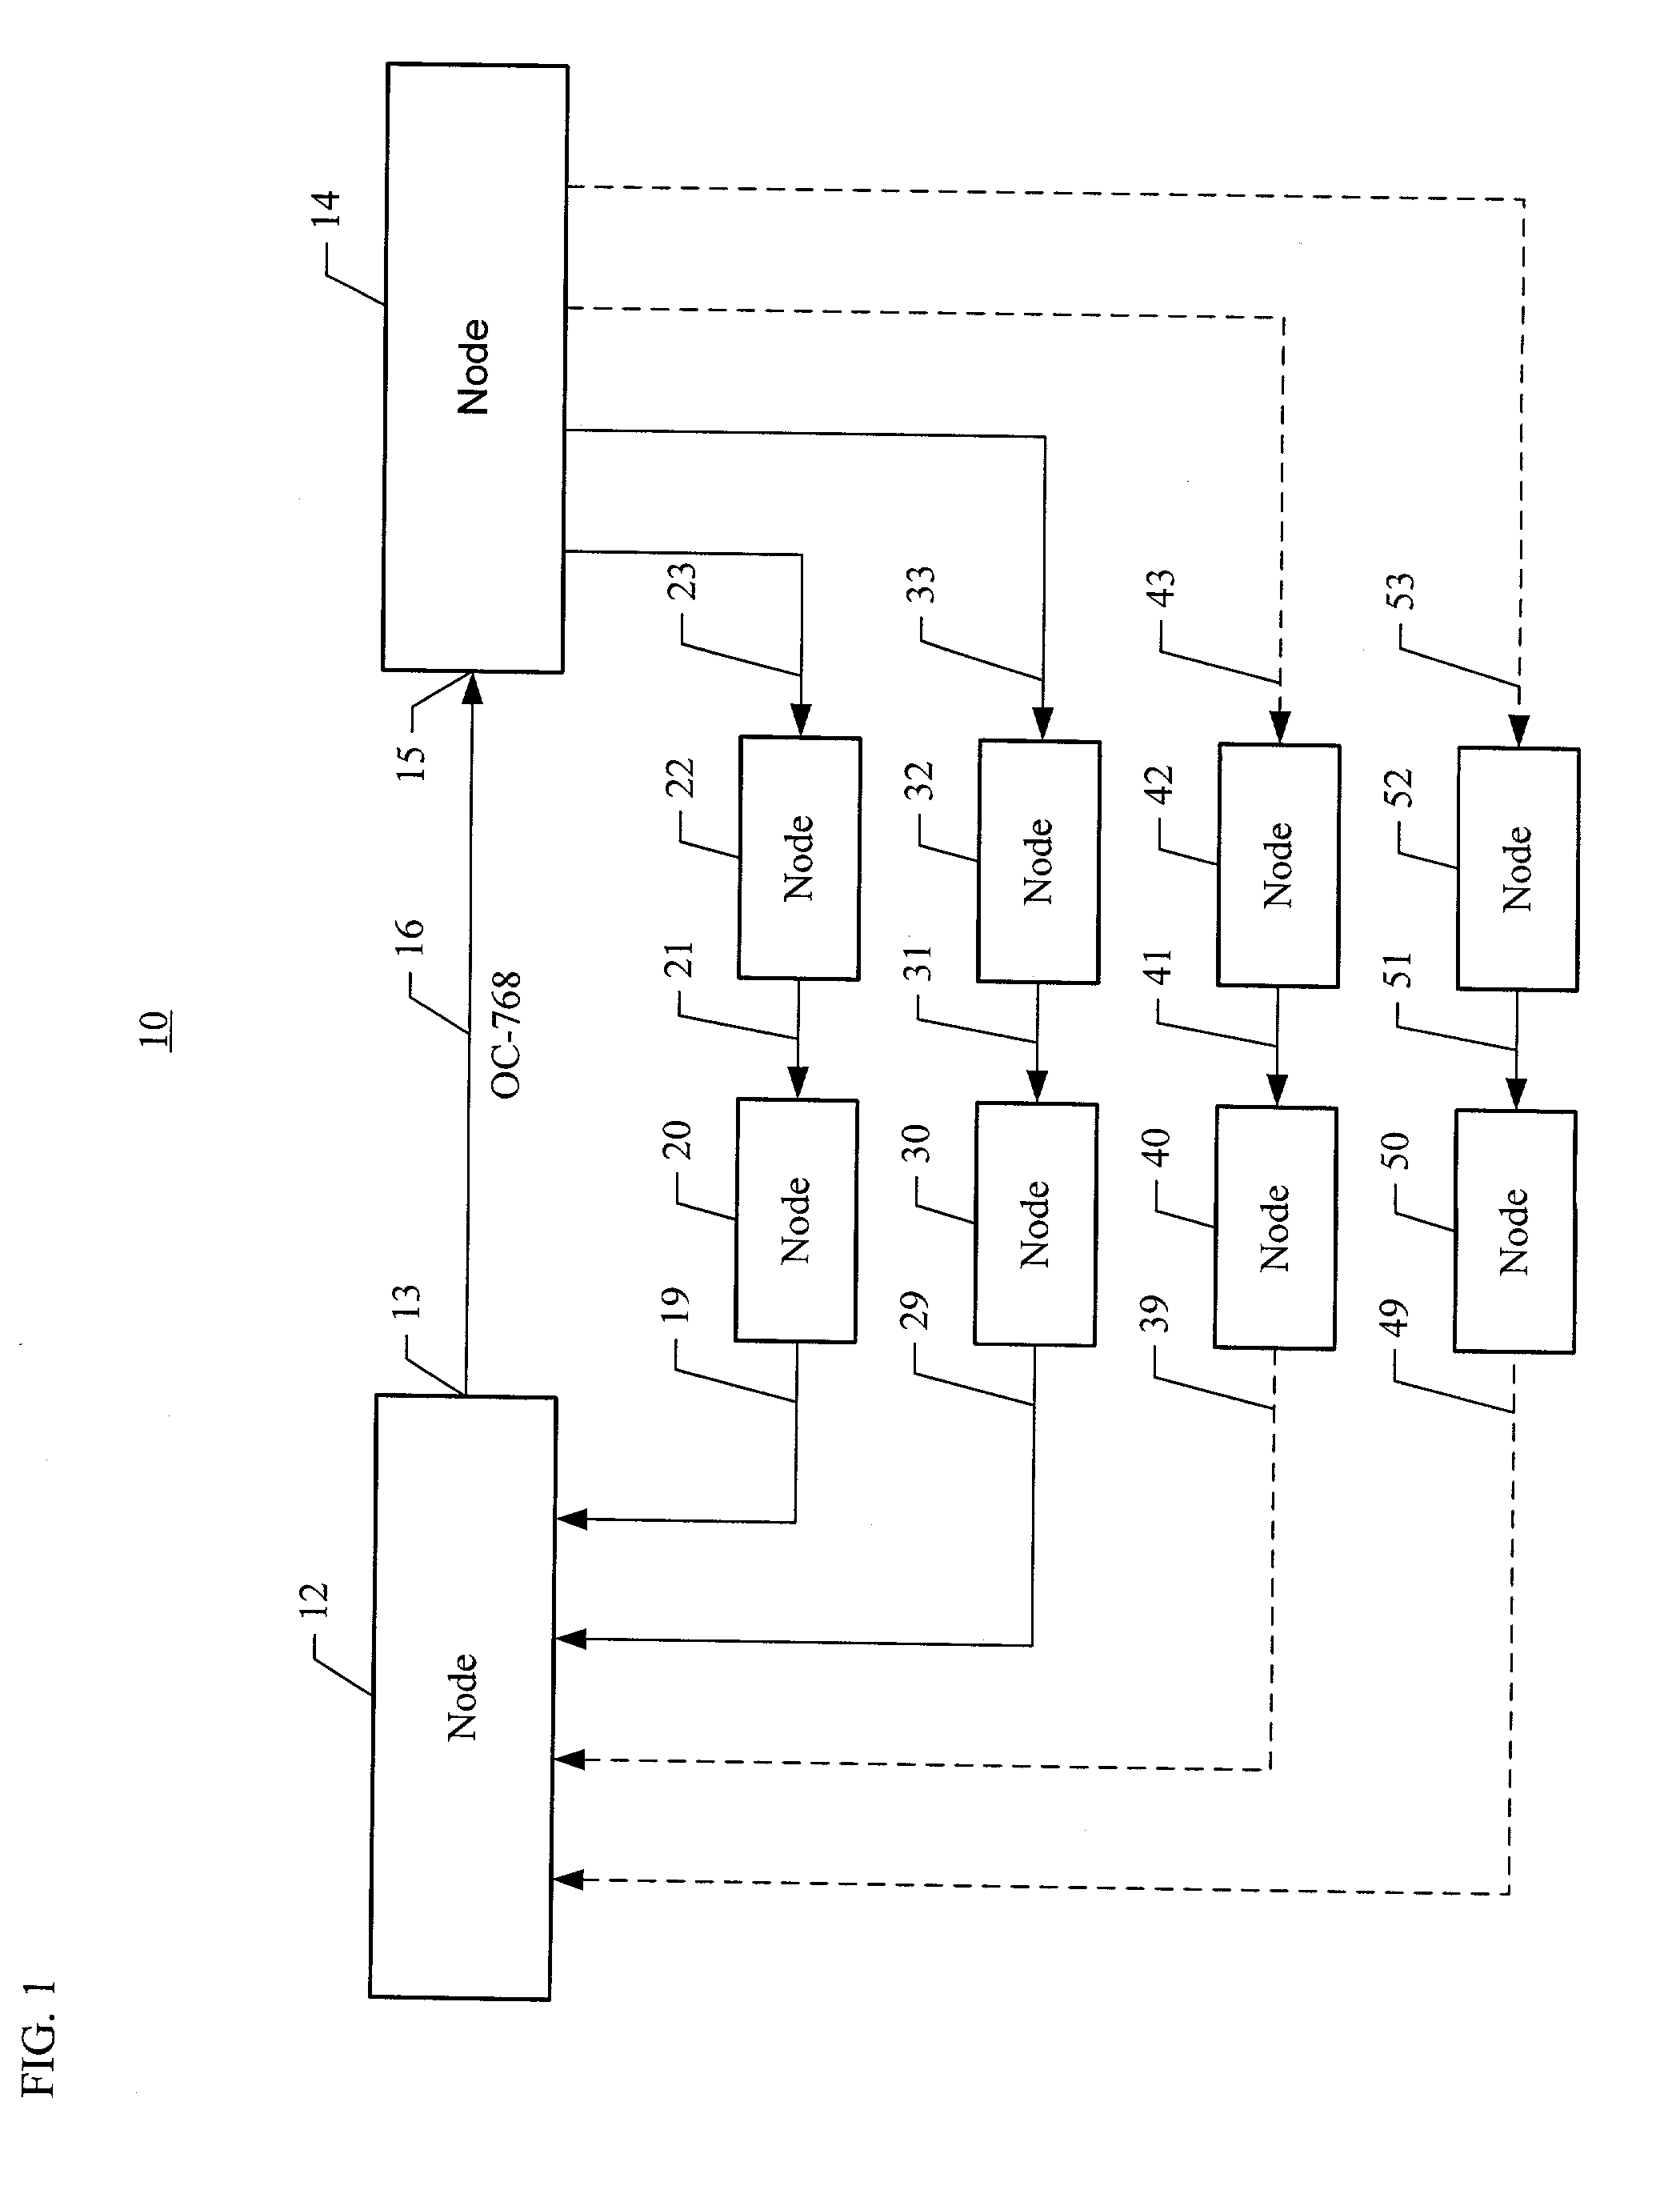 Multiplexed automatic protection switching channels